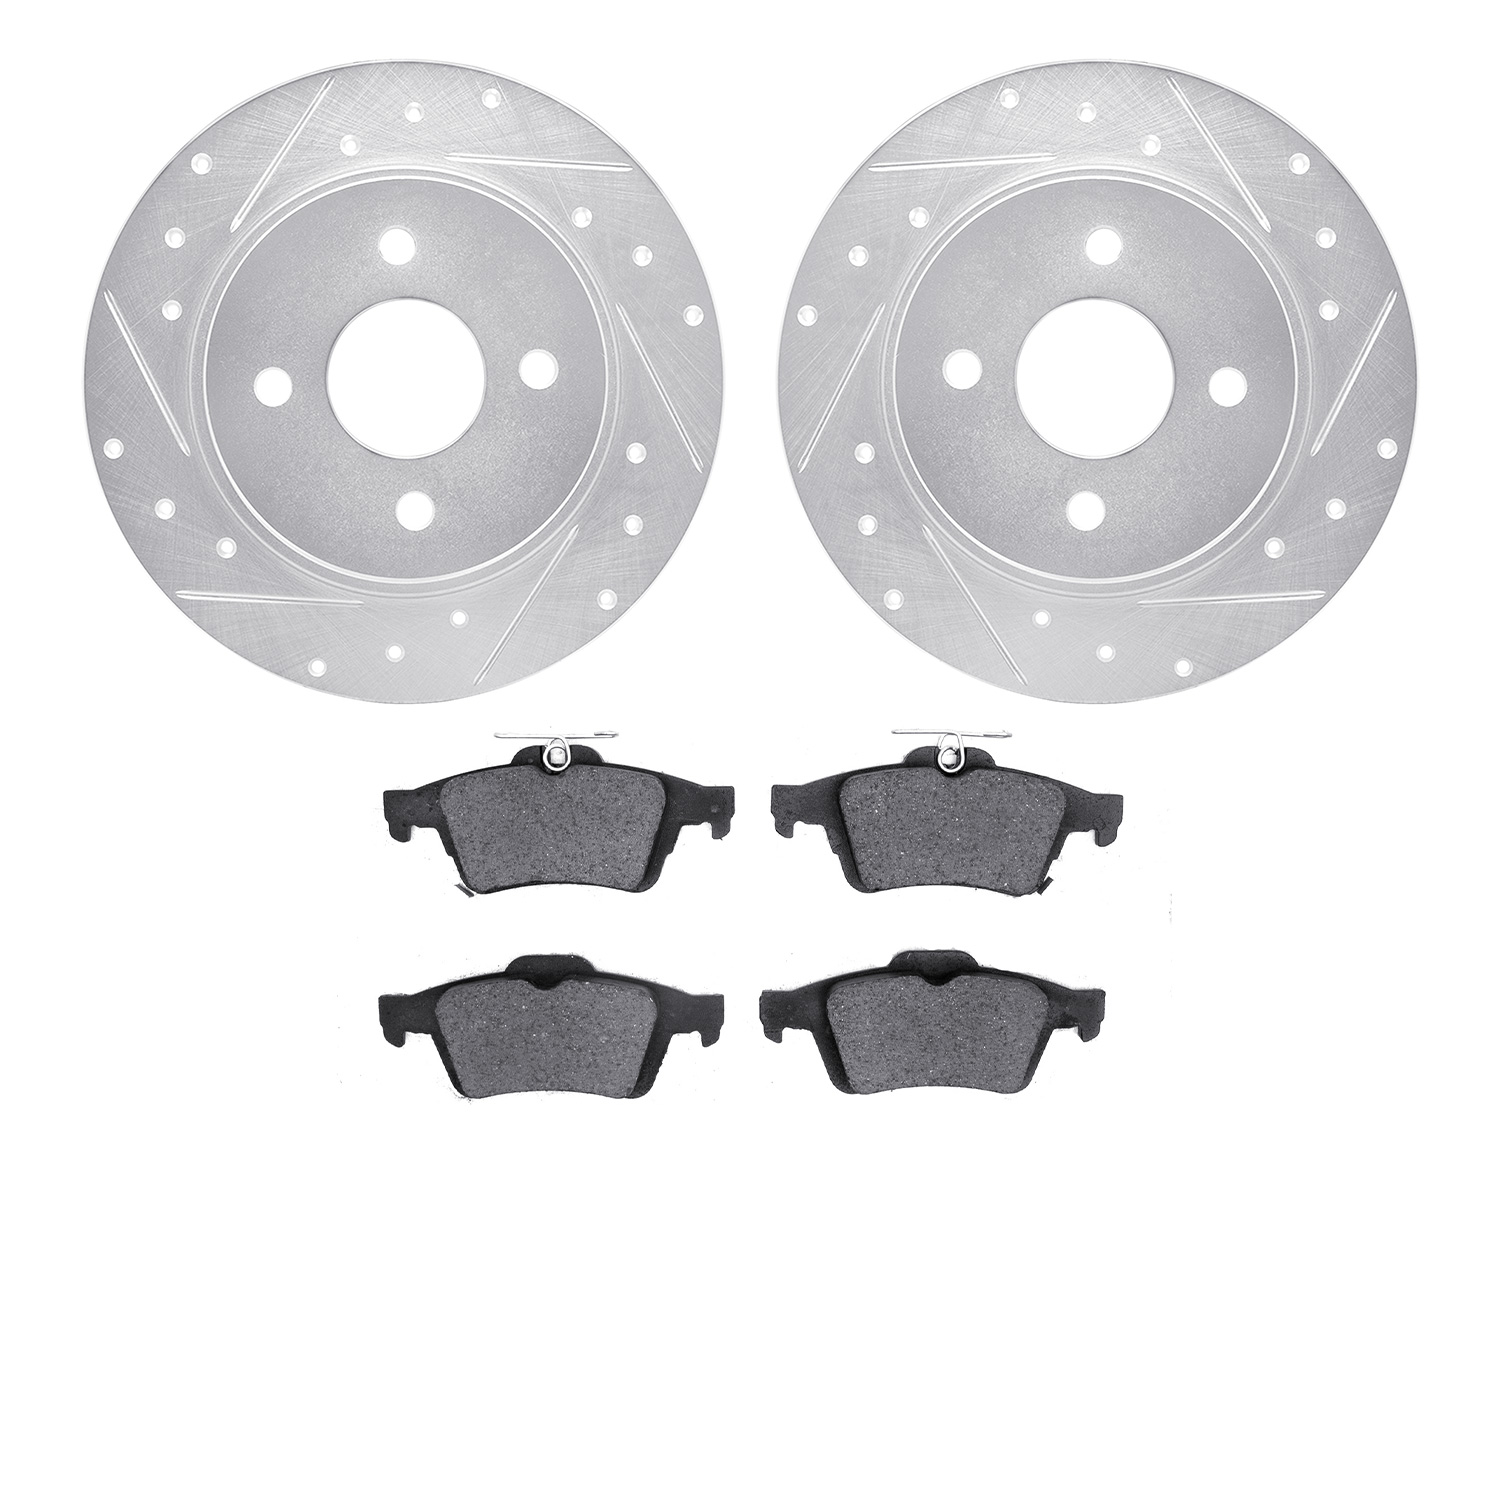 7502-54134 Drilled/Slotted Brake Rotors w/5000 Advanced Brake Pads Kit [Silver], Fits Select Ford/Lincoln/Mercury/Mazda, Positio